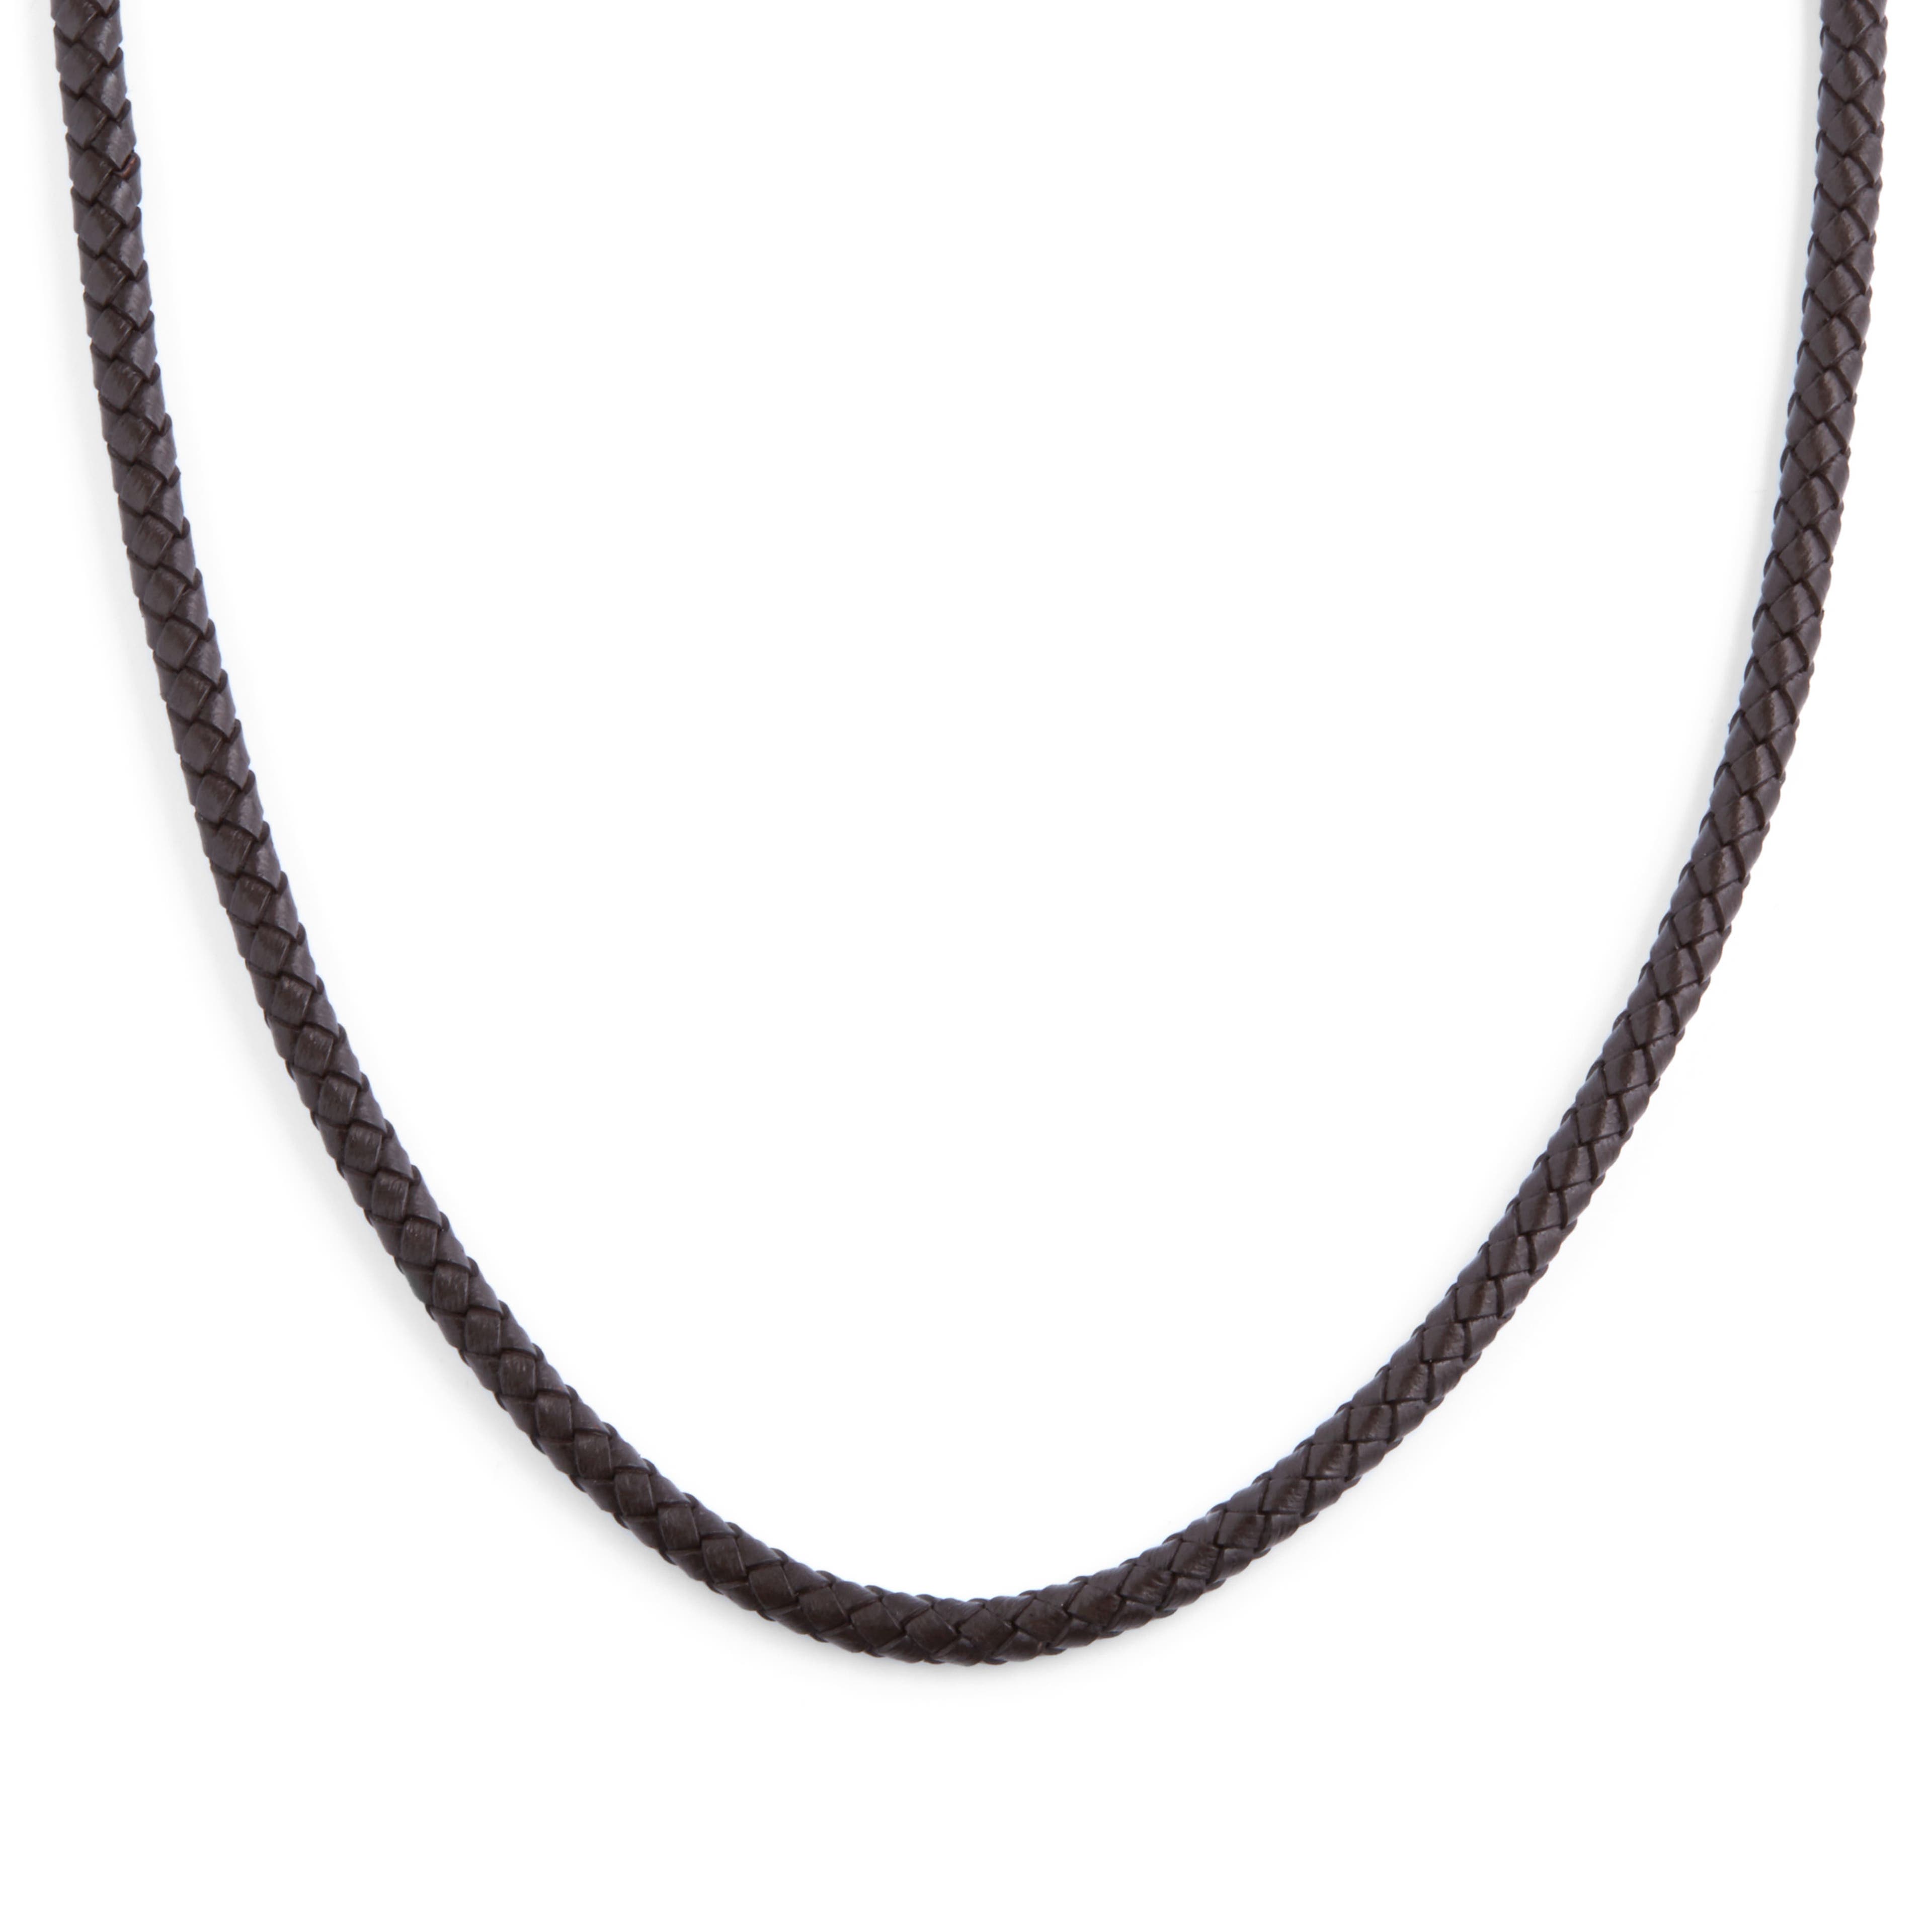 3mm Brown Woven Leather Necklace